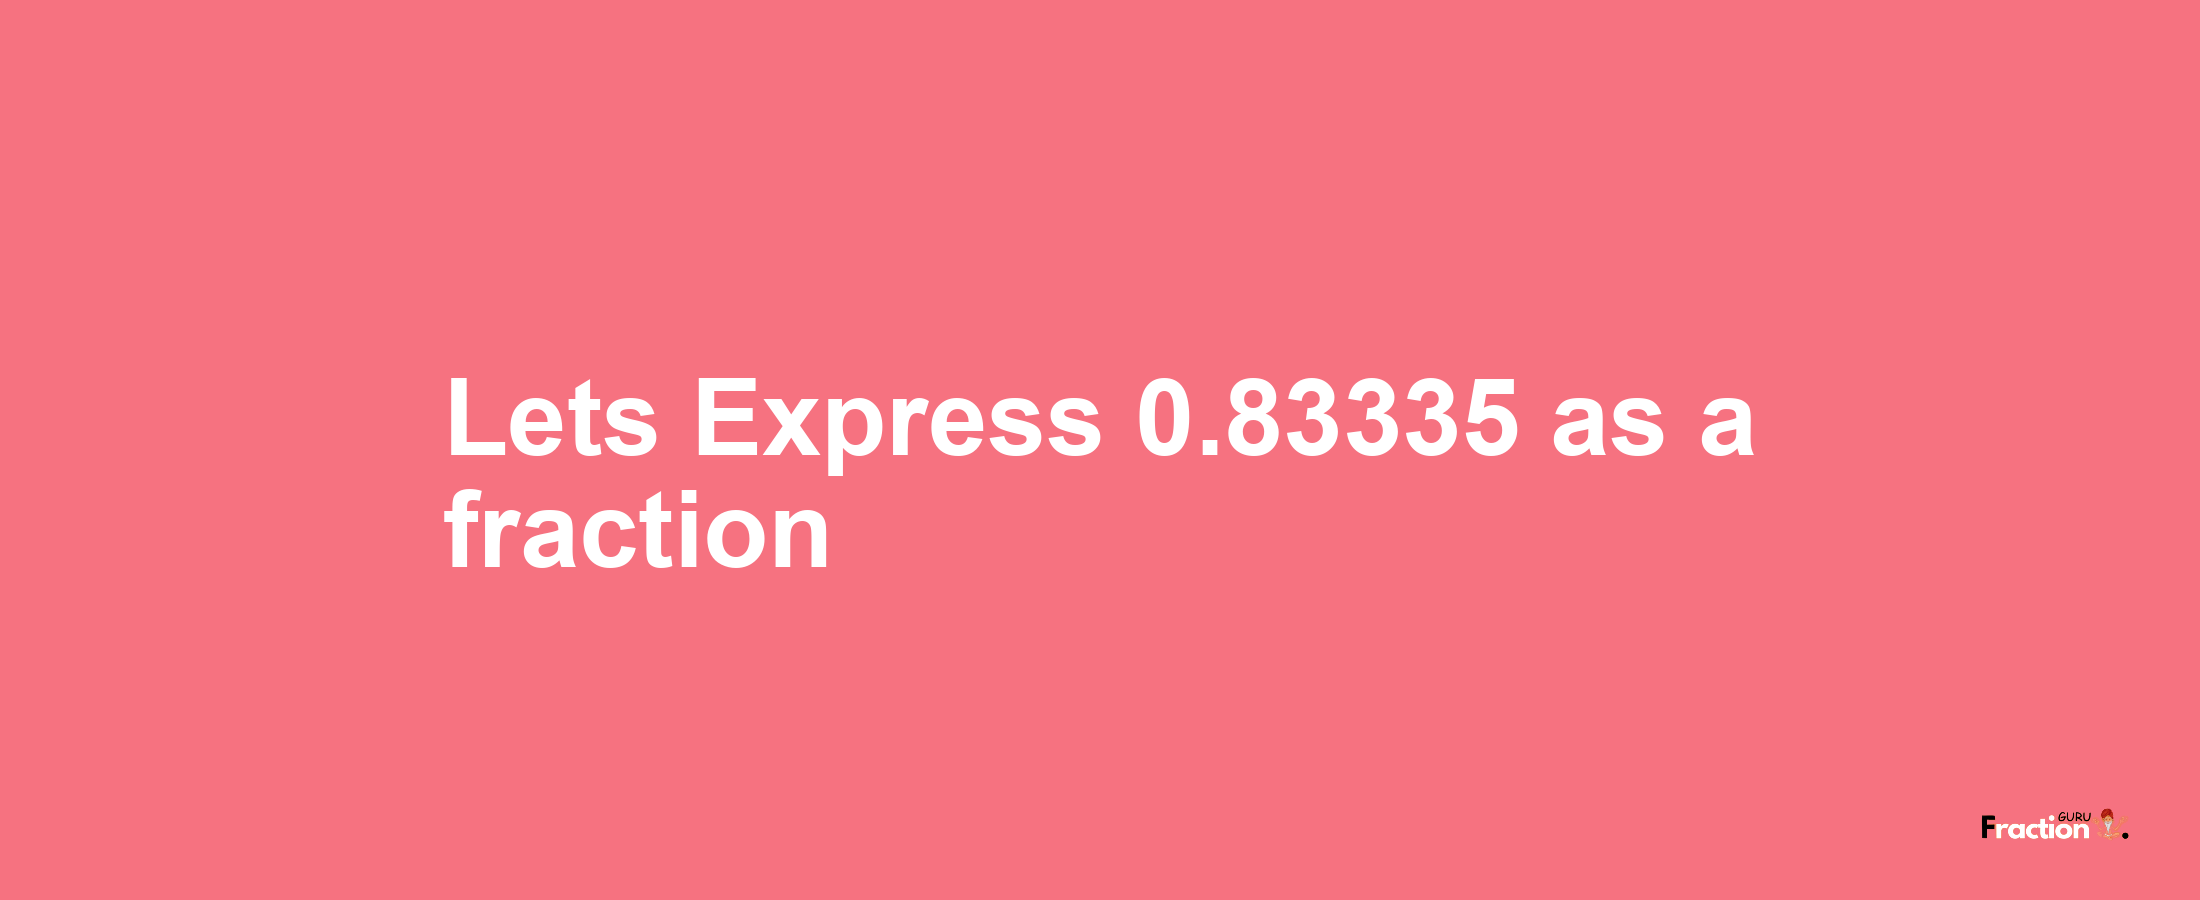 Lets Express 0.83335 as afraction